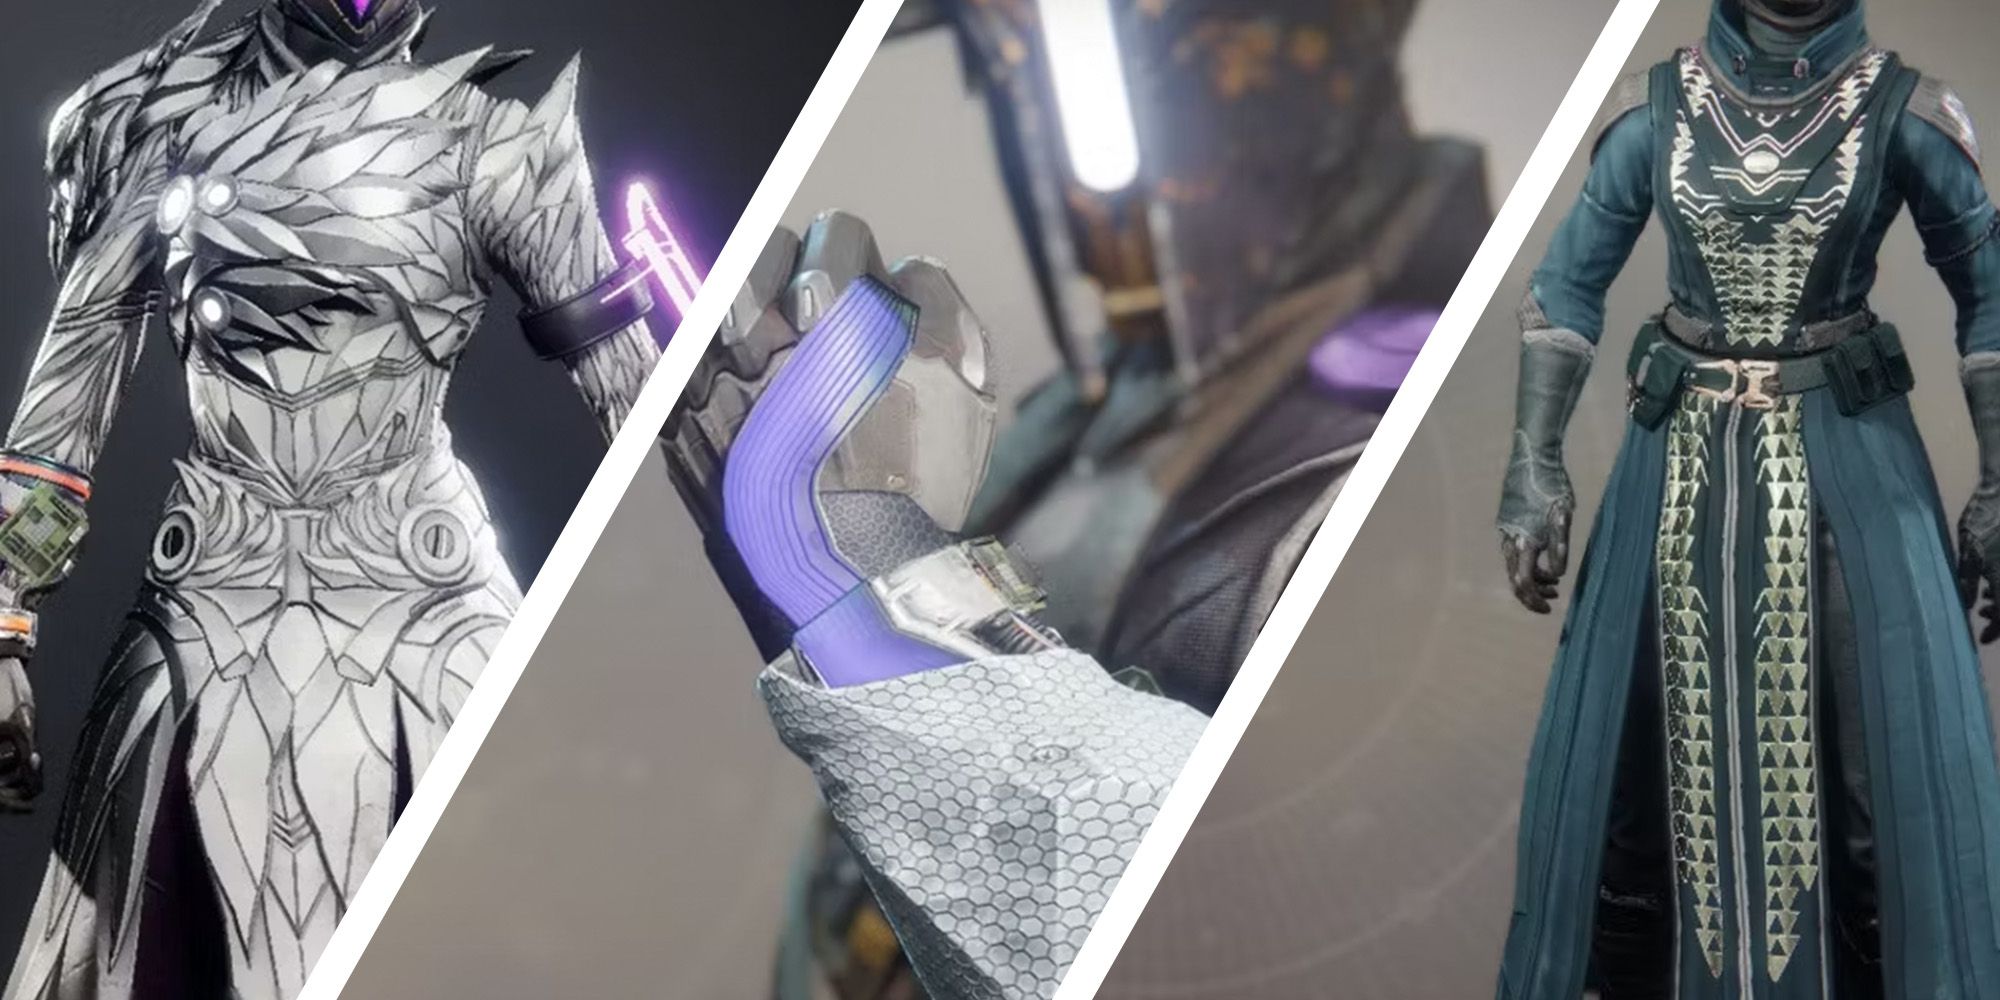 Destiny 2 Warlock Showing Exotic gauntlet, next to two exotic chest armors